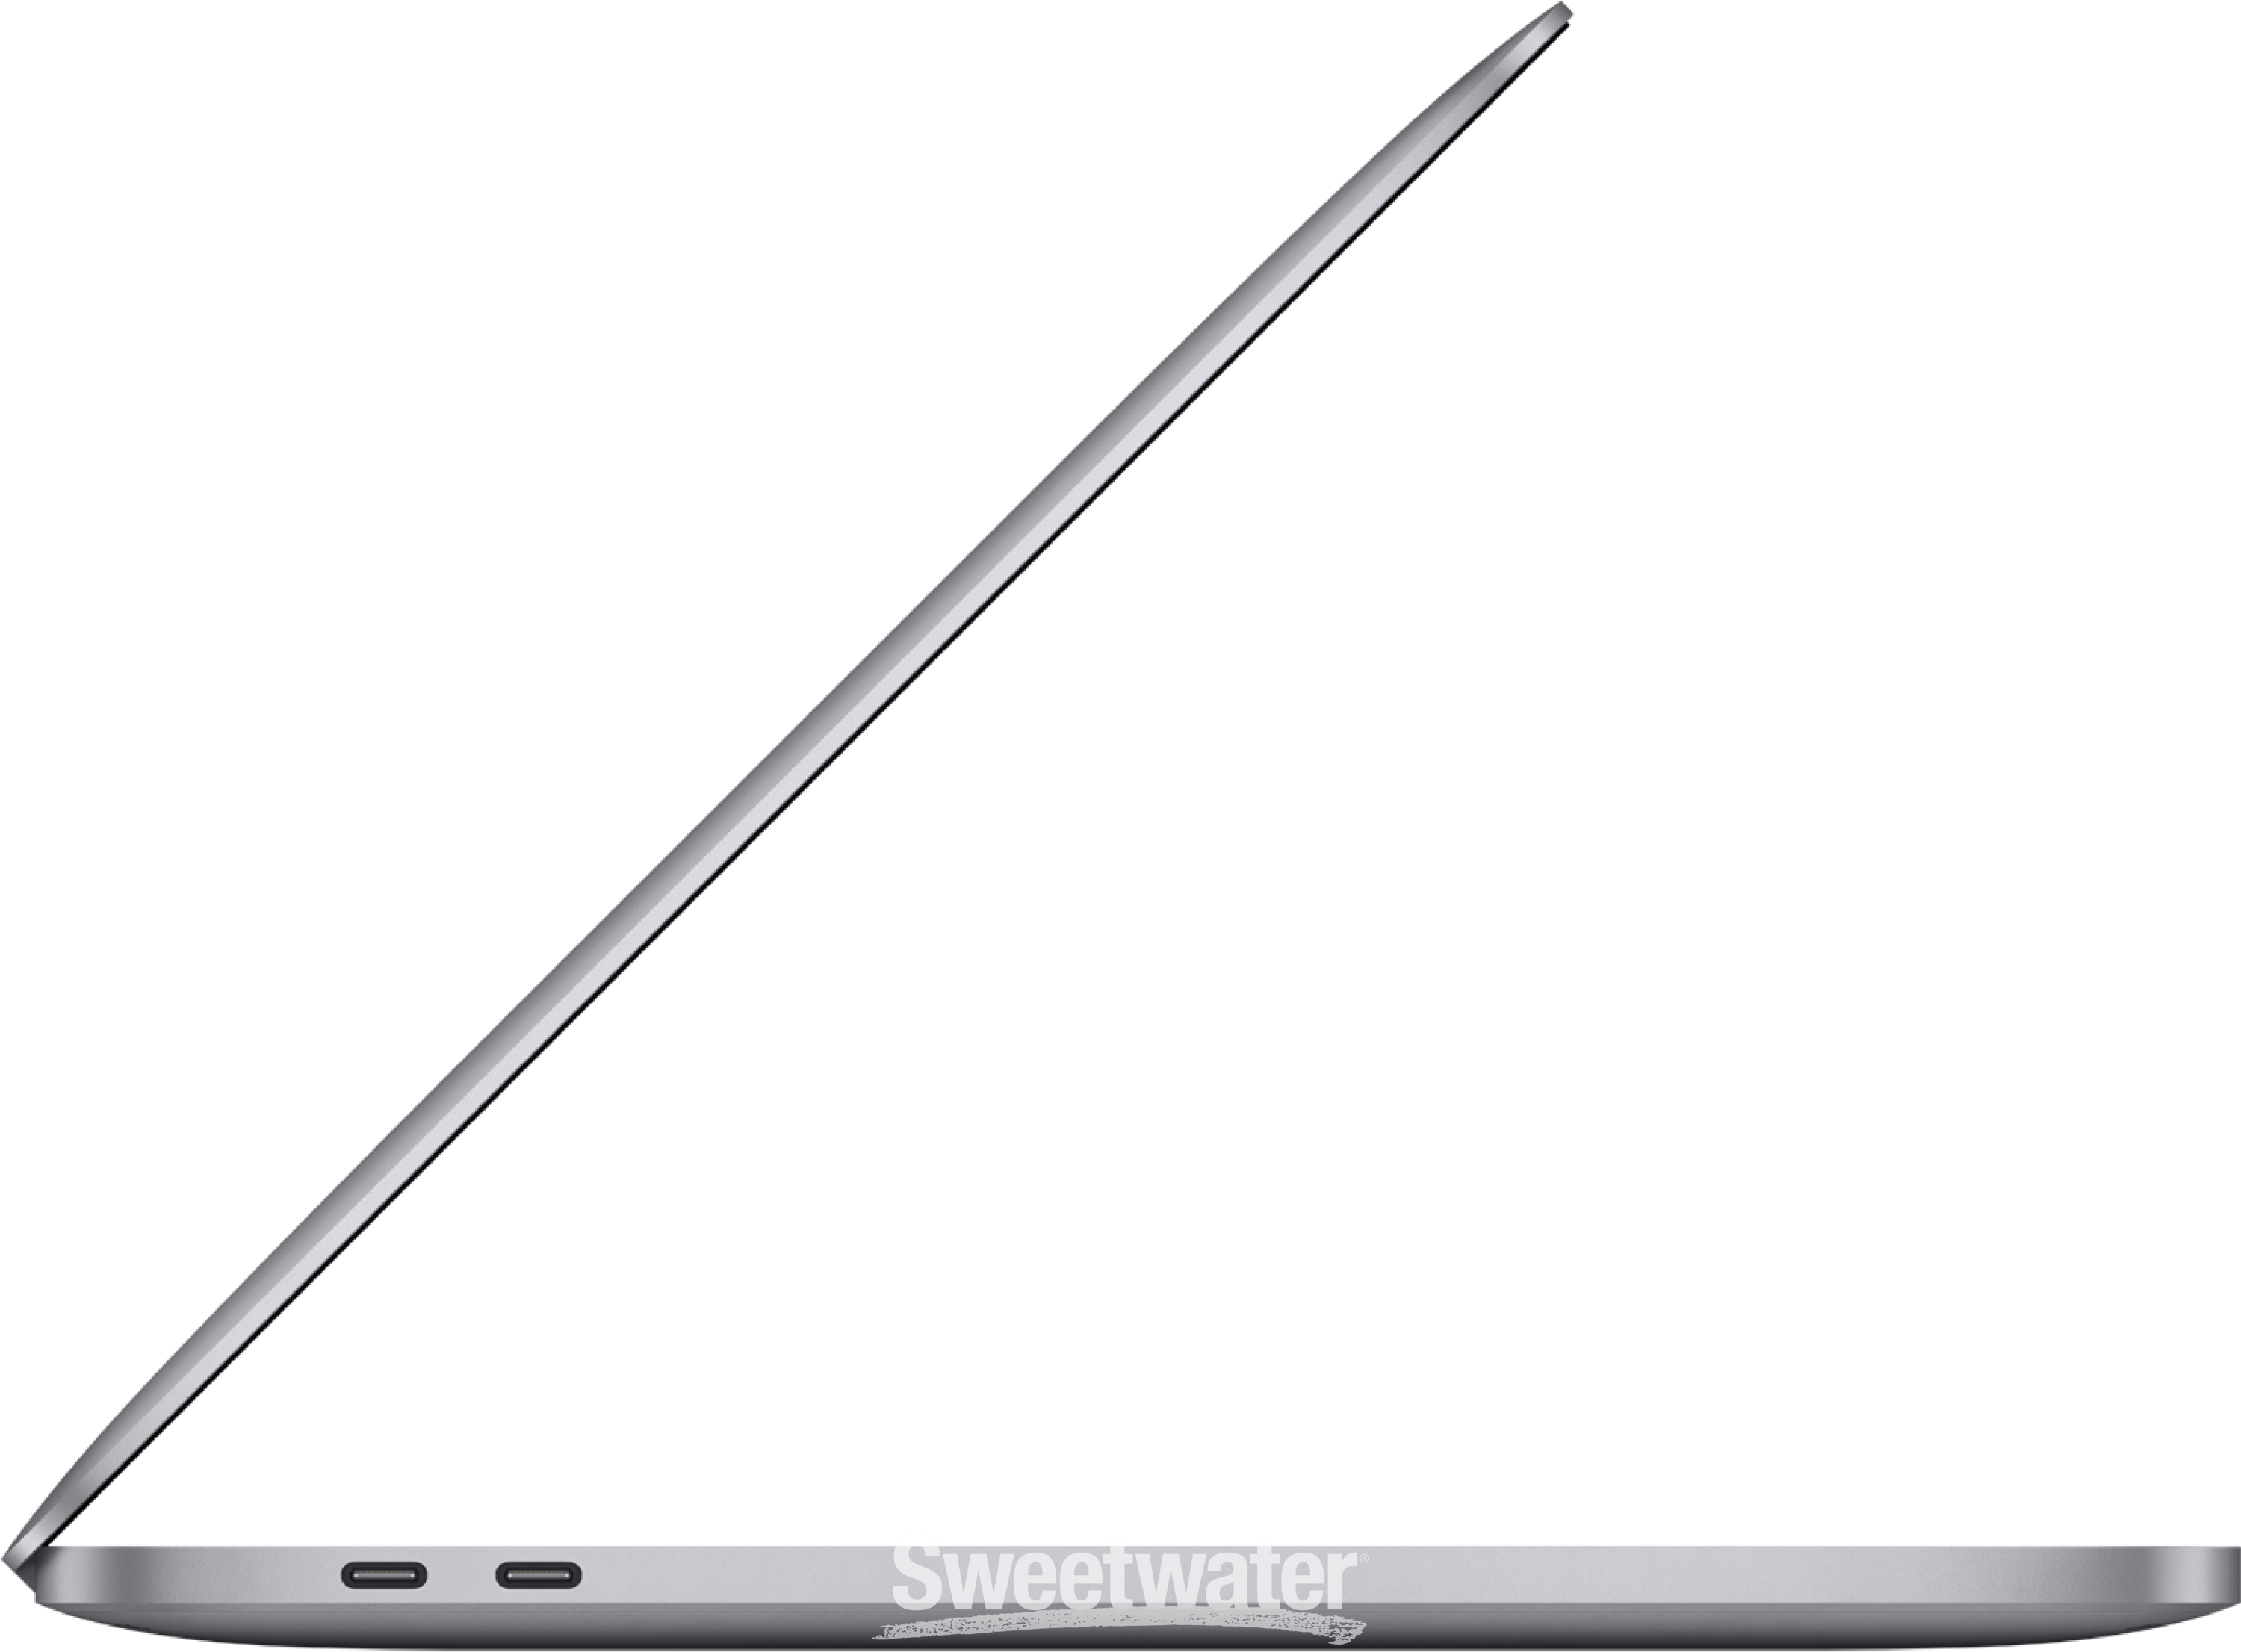 Apple MacBook Pro 13-inch w/Touch Bar 1.4 GHz 4-Core i5 512GB Space Gray |  Sweetwater